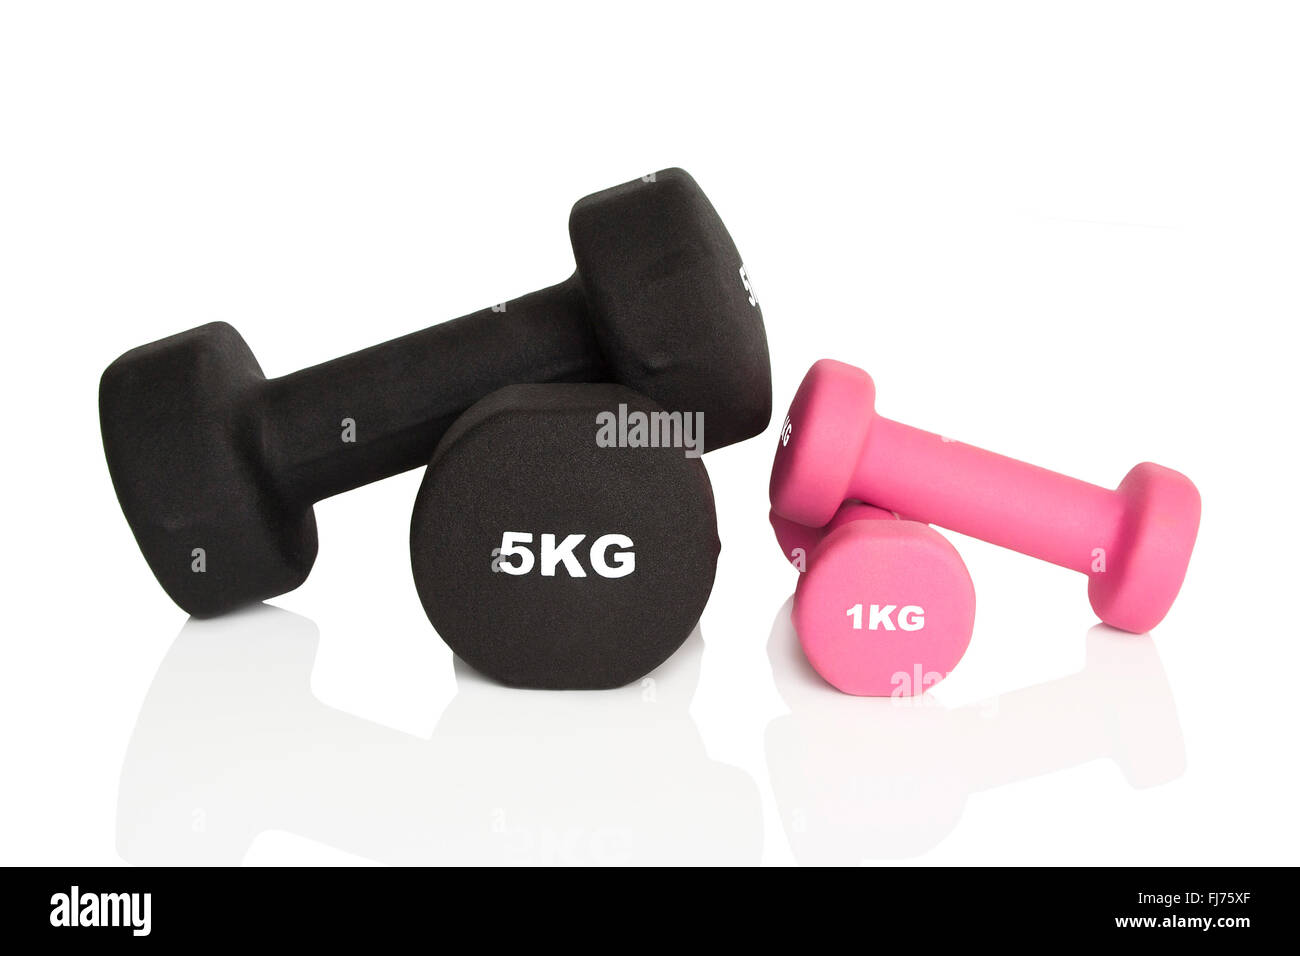 Pink 1kg and black 5kg dumbbells isolated on white background. Weights for a fitness training. Stock Photo